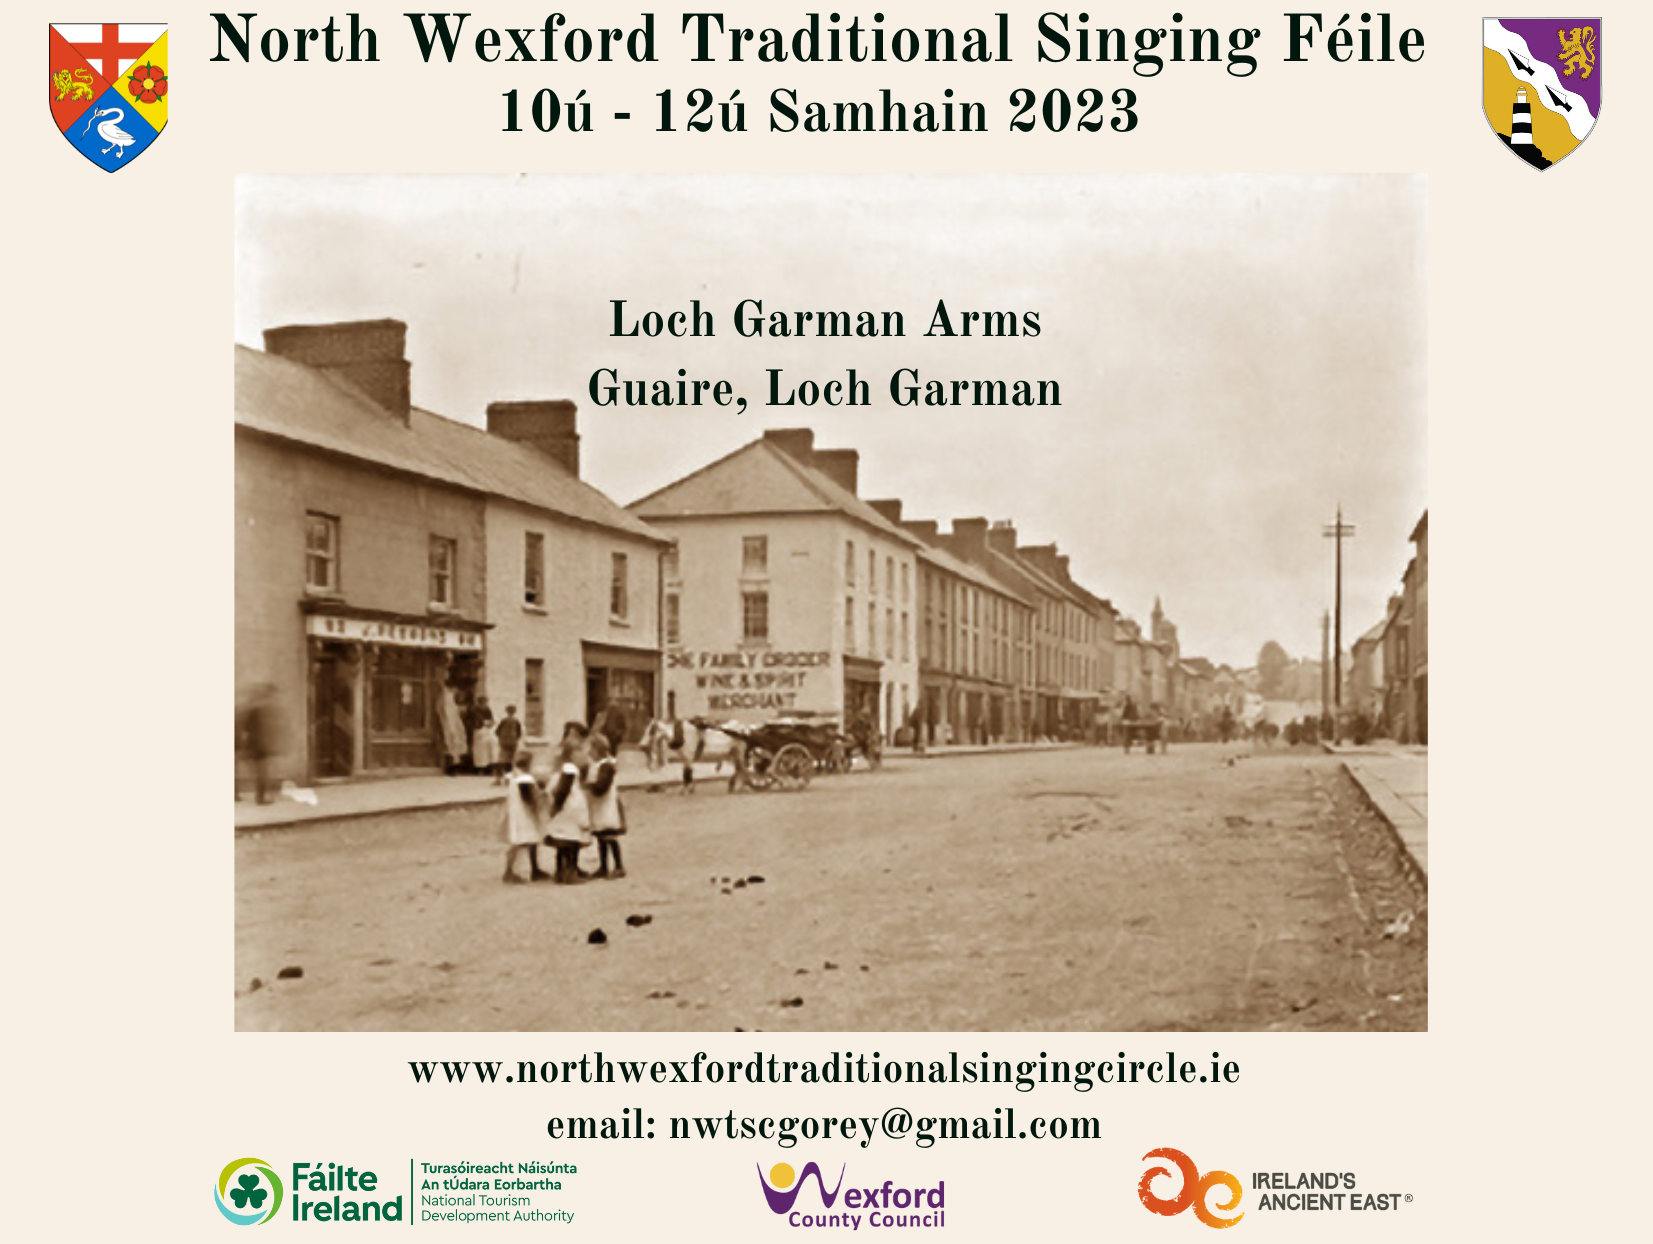 North Wexford Traditional Singing Féile 2023: 10th - 12th of November